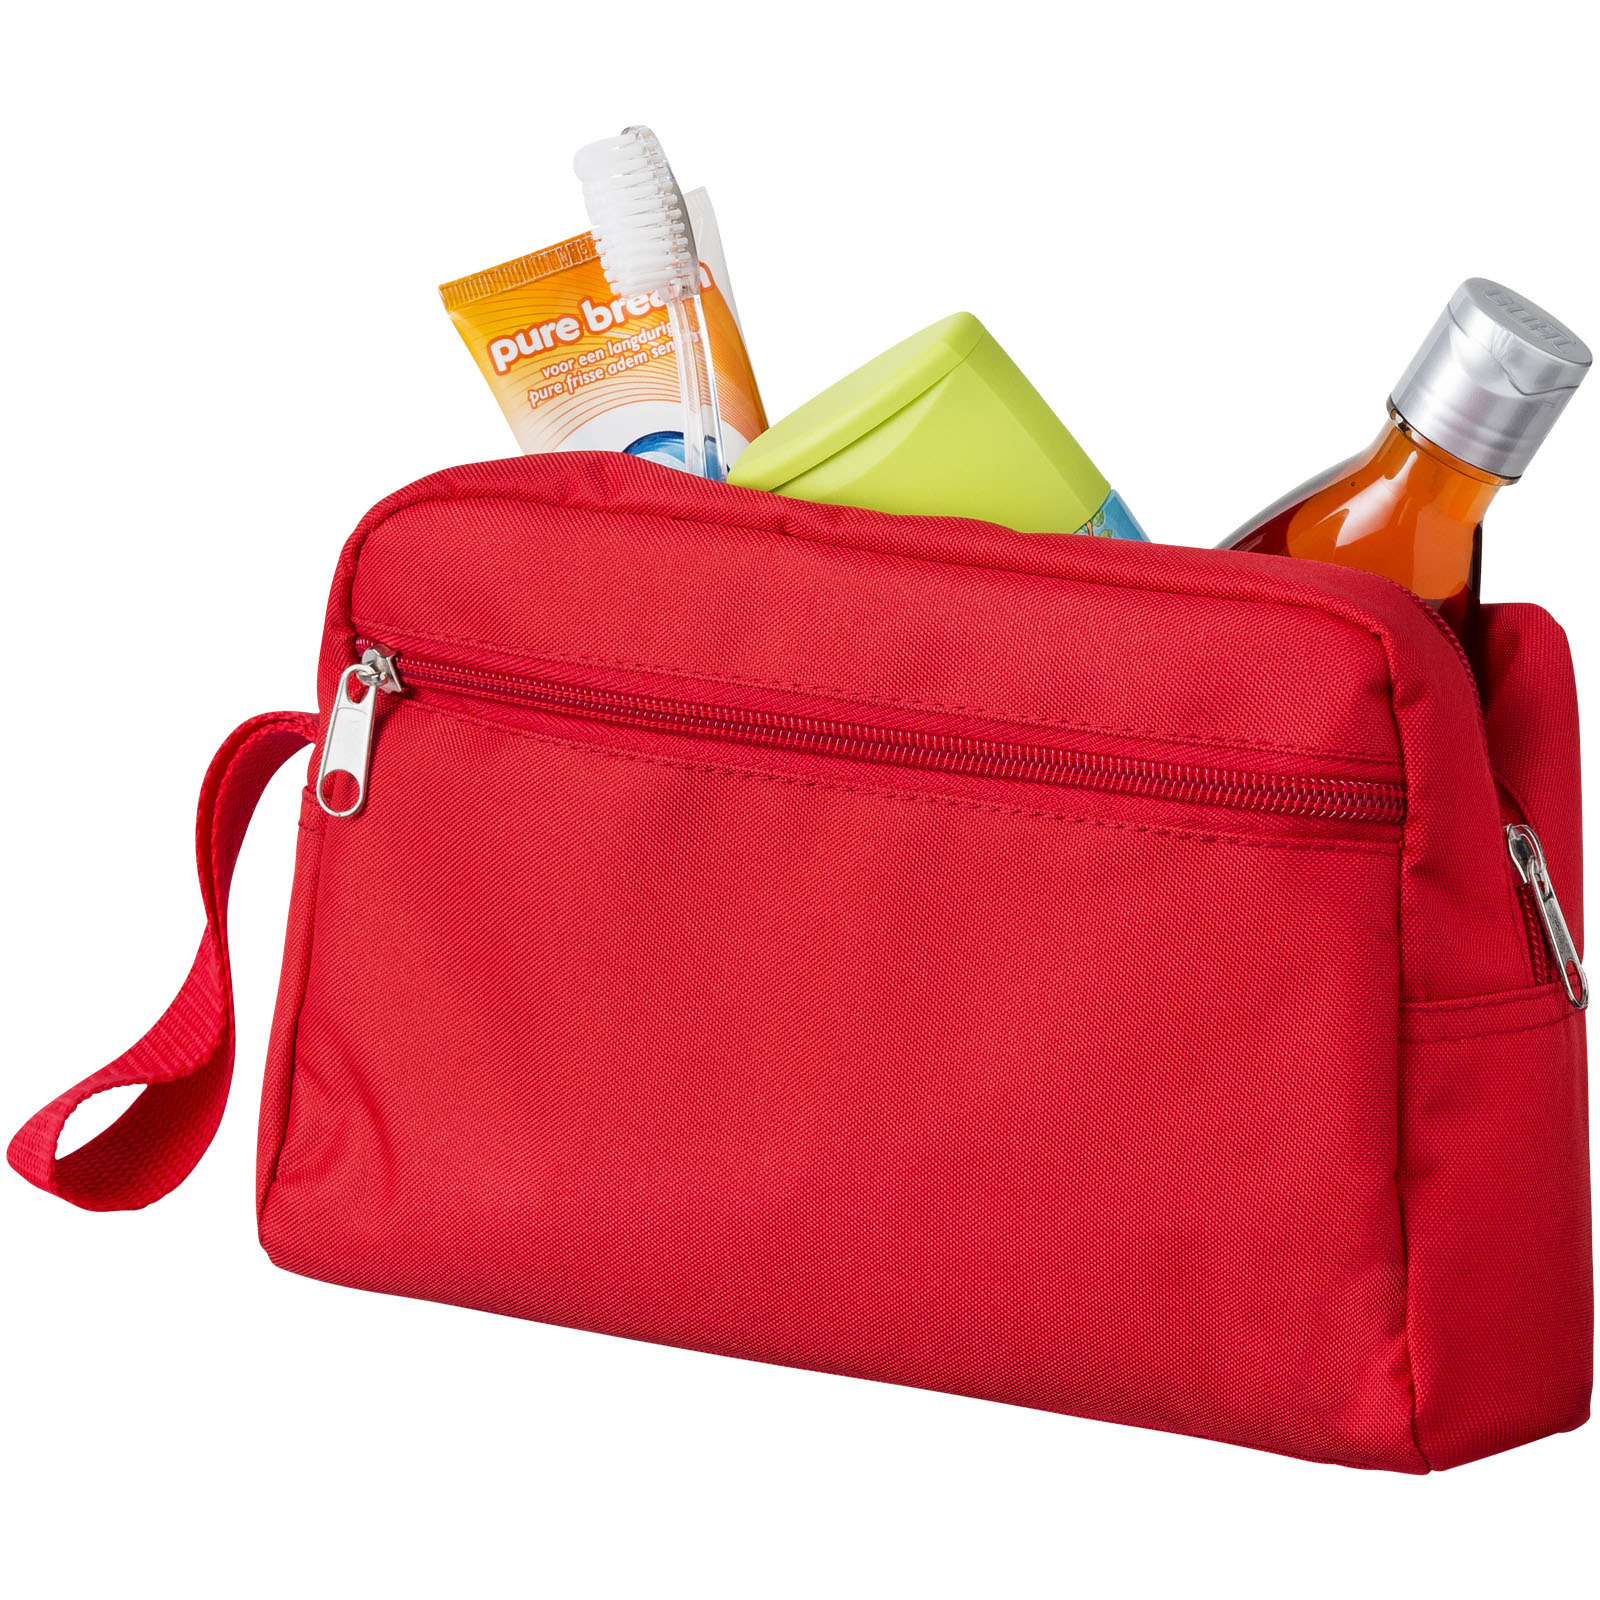 Travel toiletry bag UNDID with strap